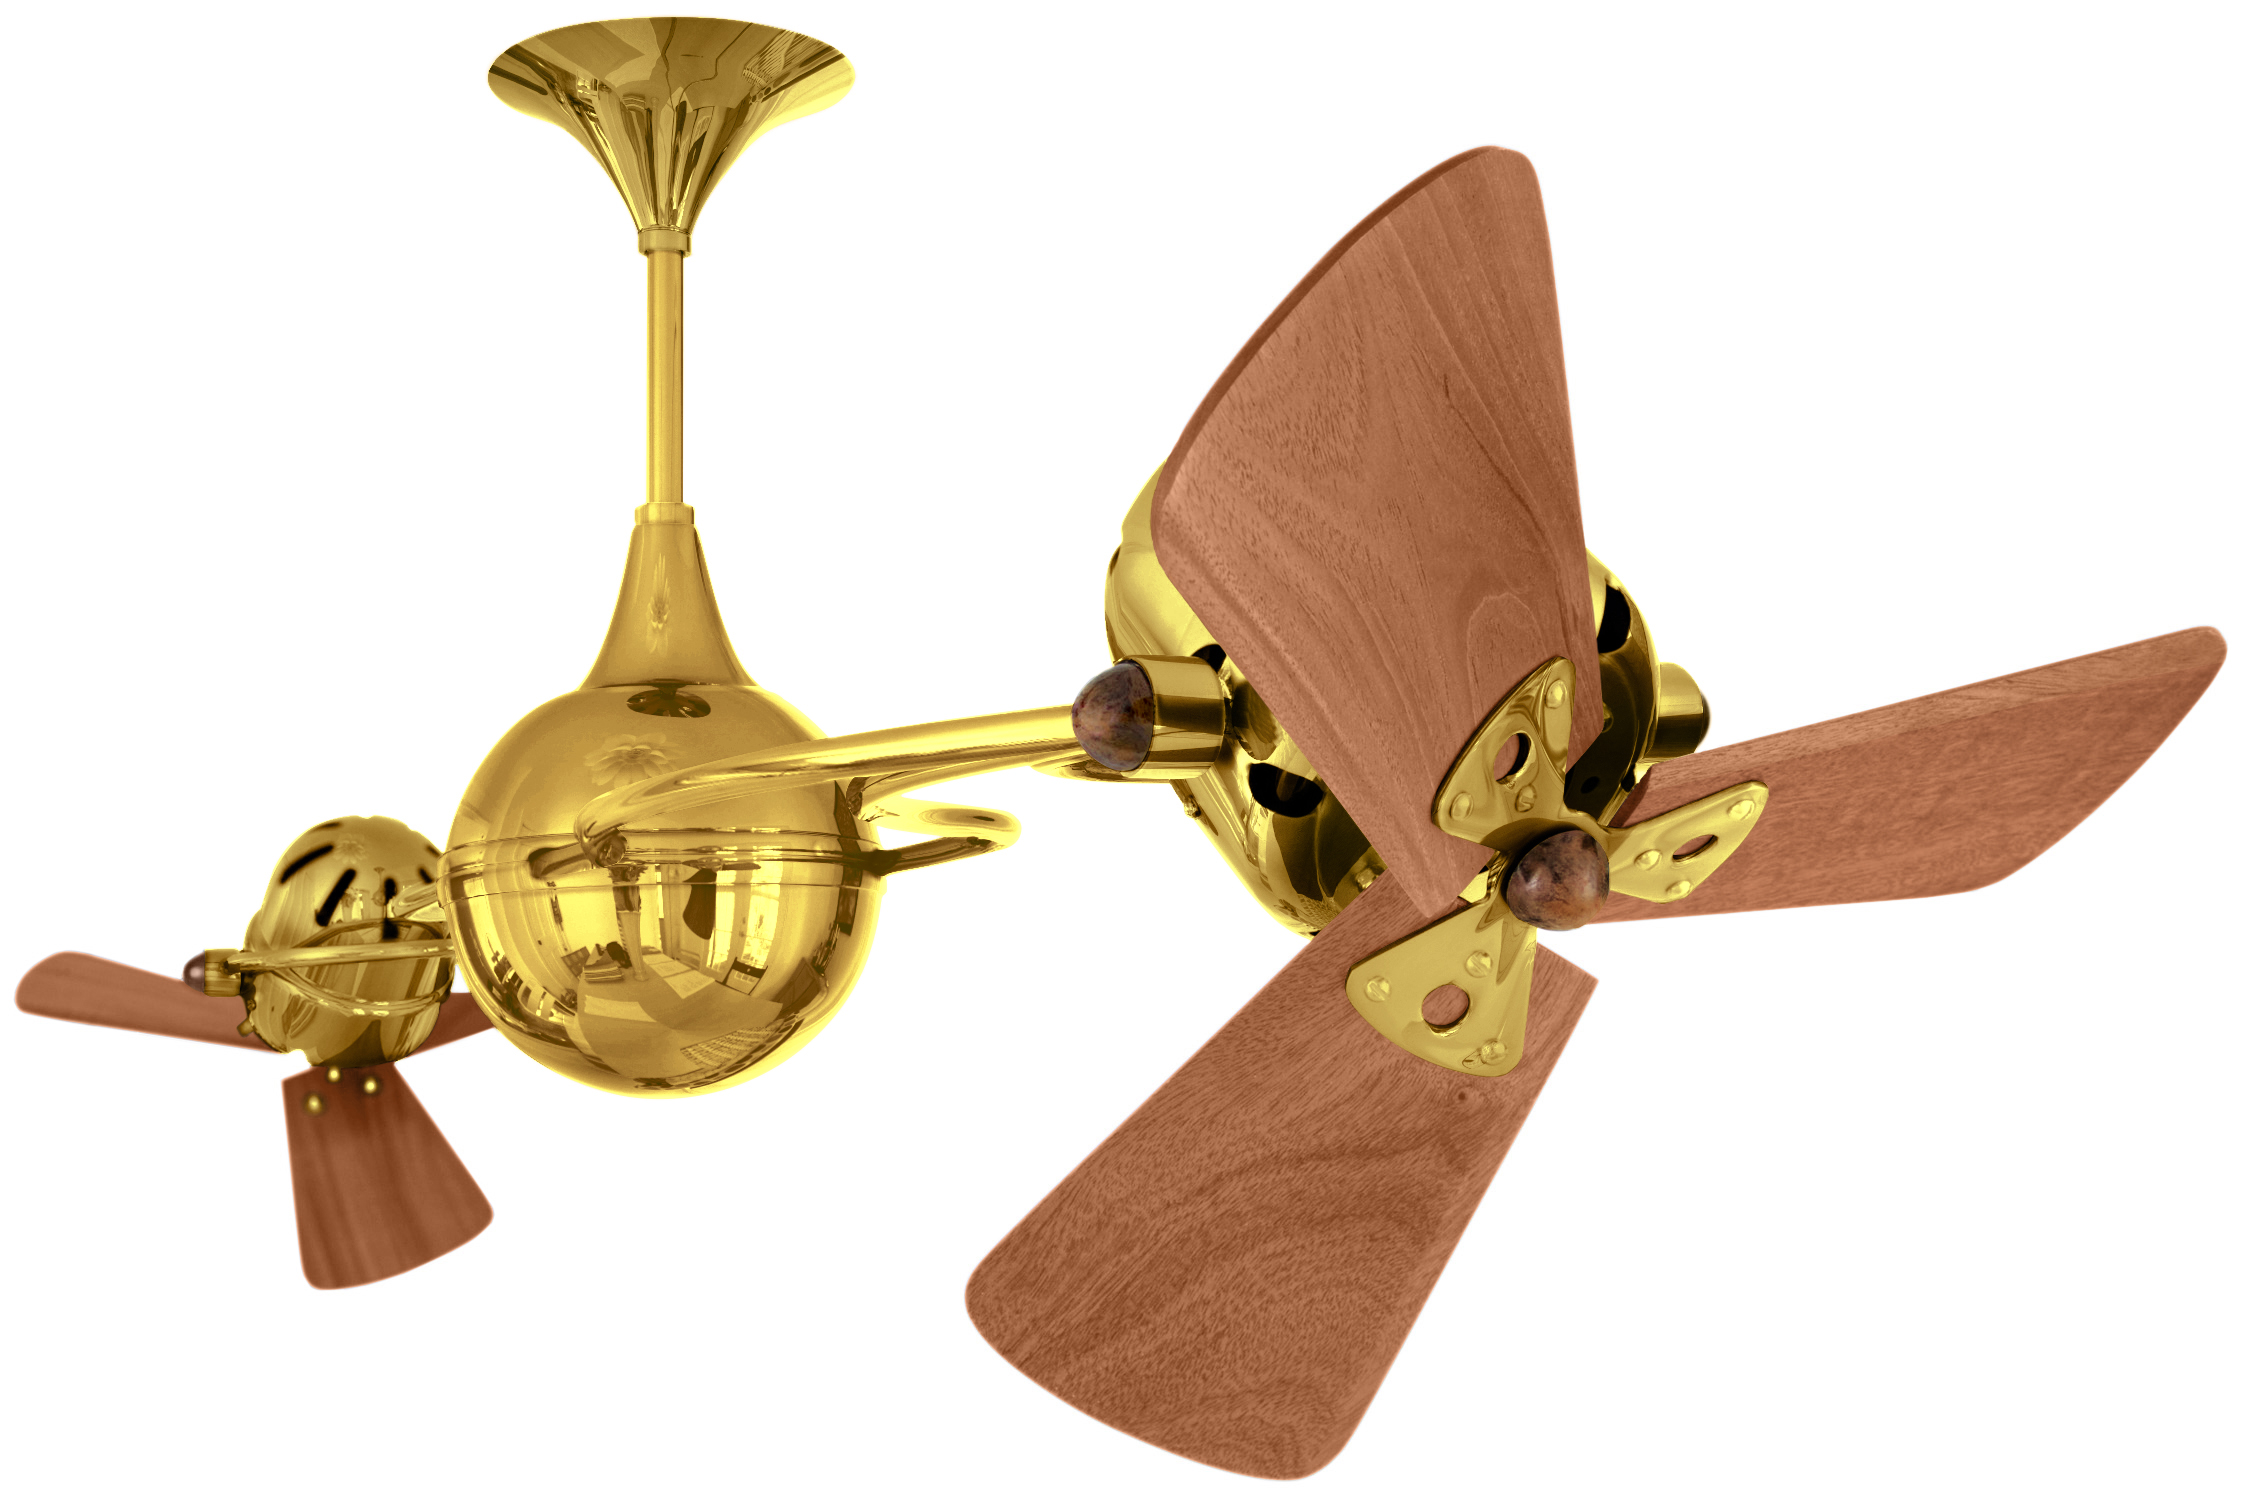 Italo Ventania rotational dual head ceiling fan in Gold / Ouro finish with solid mahogany wood blades made by Matthews Fan Company.